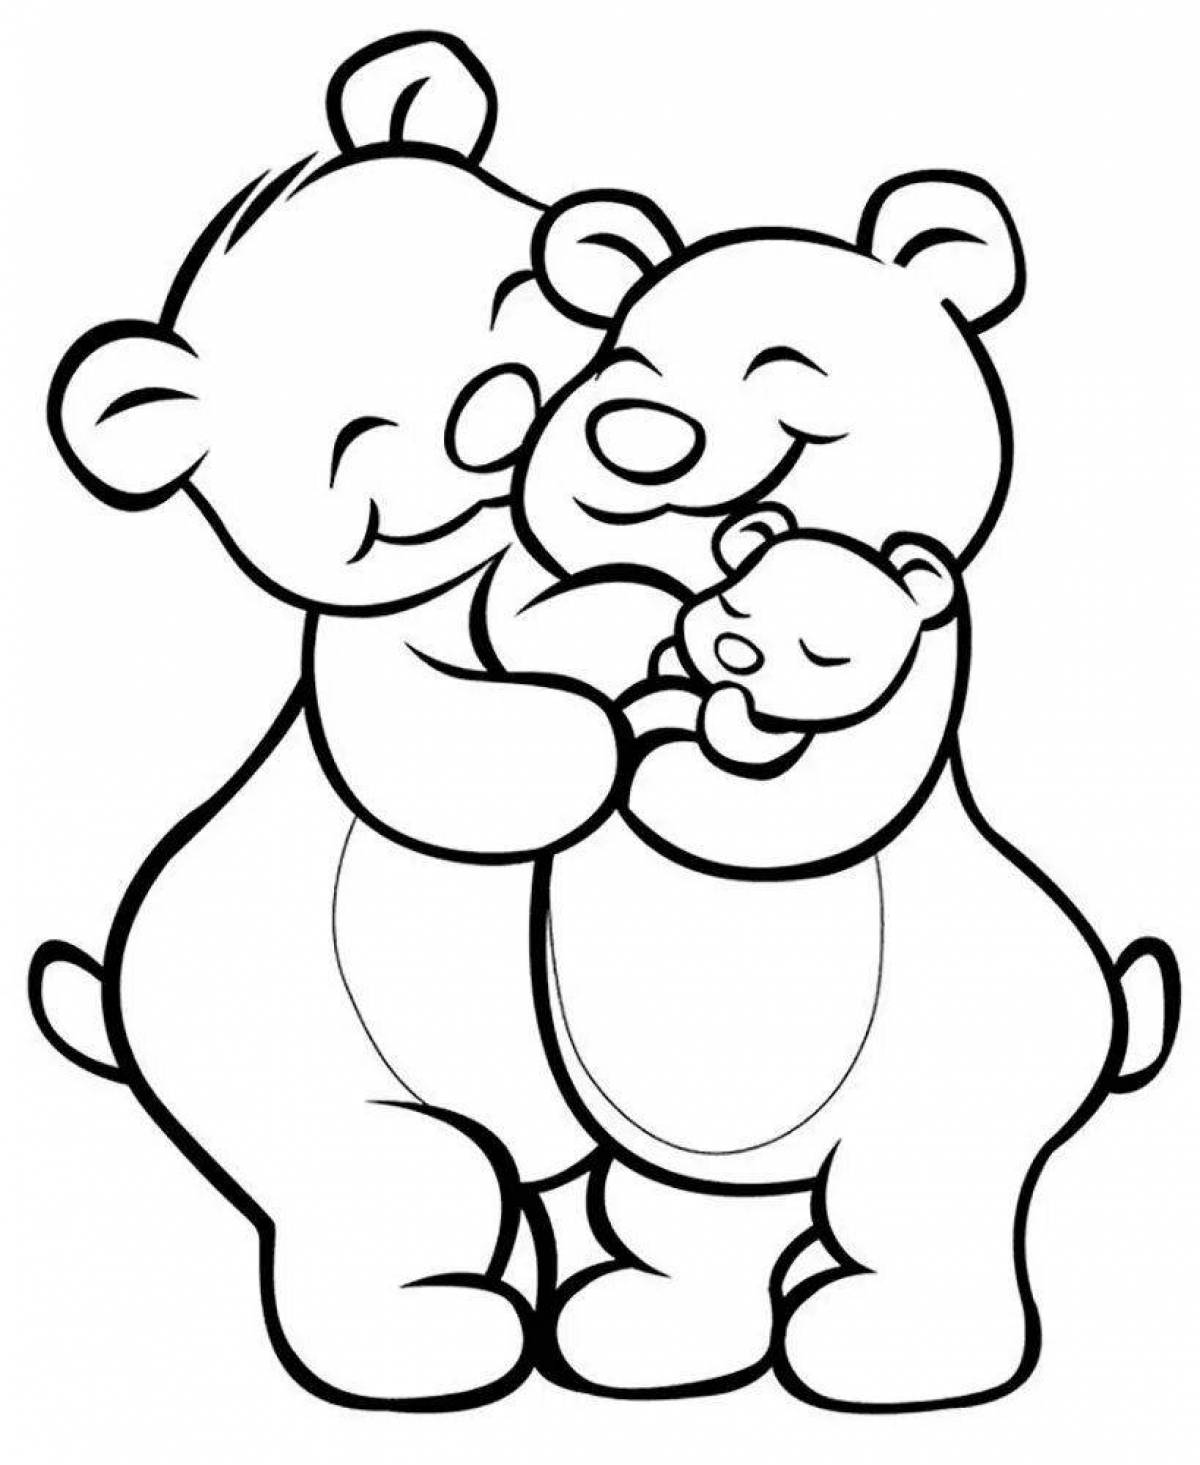 Grand coloring page day of family love and fidelity